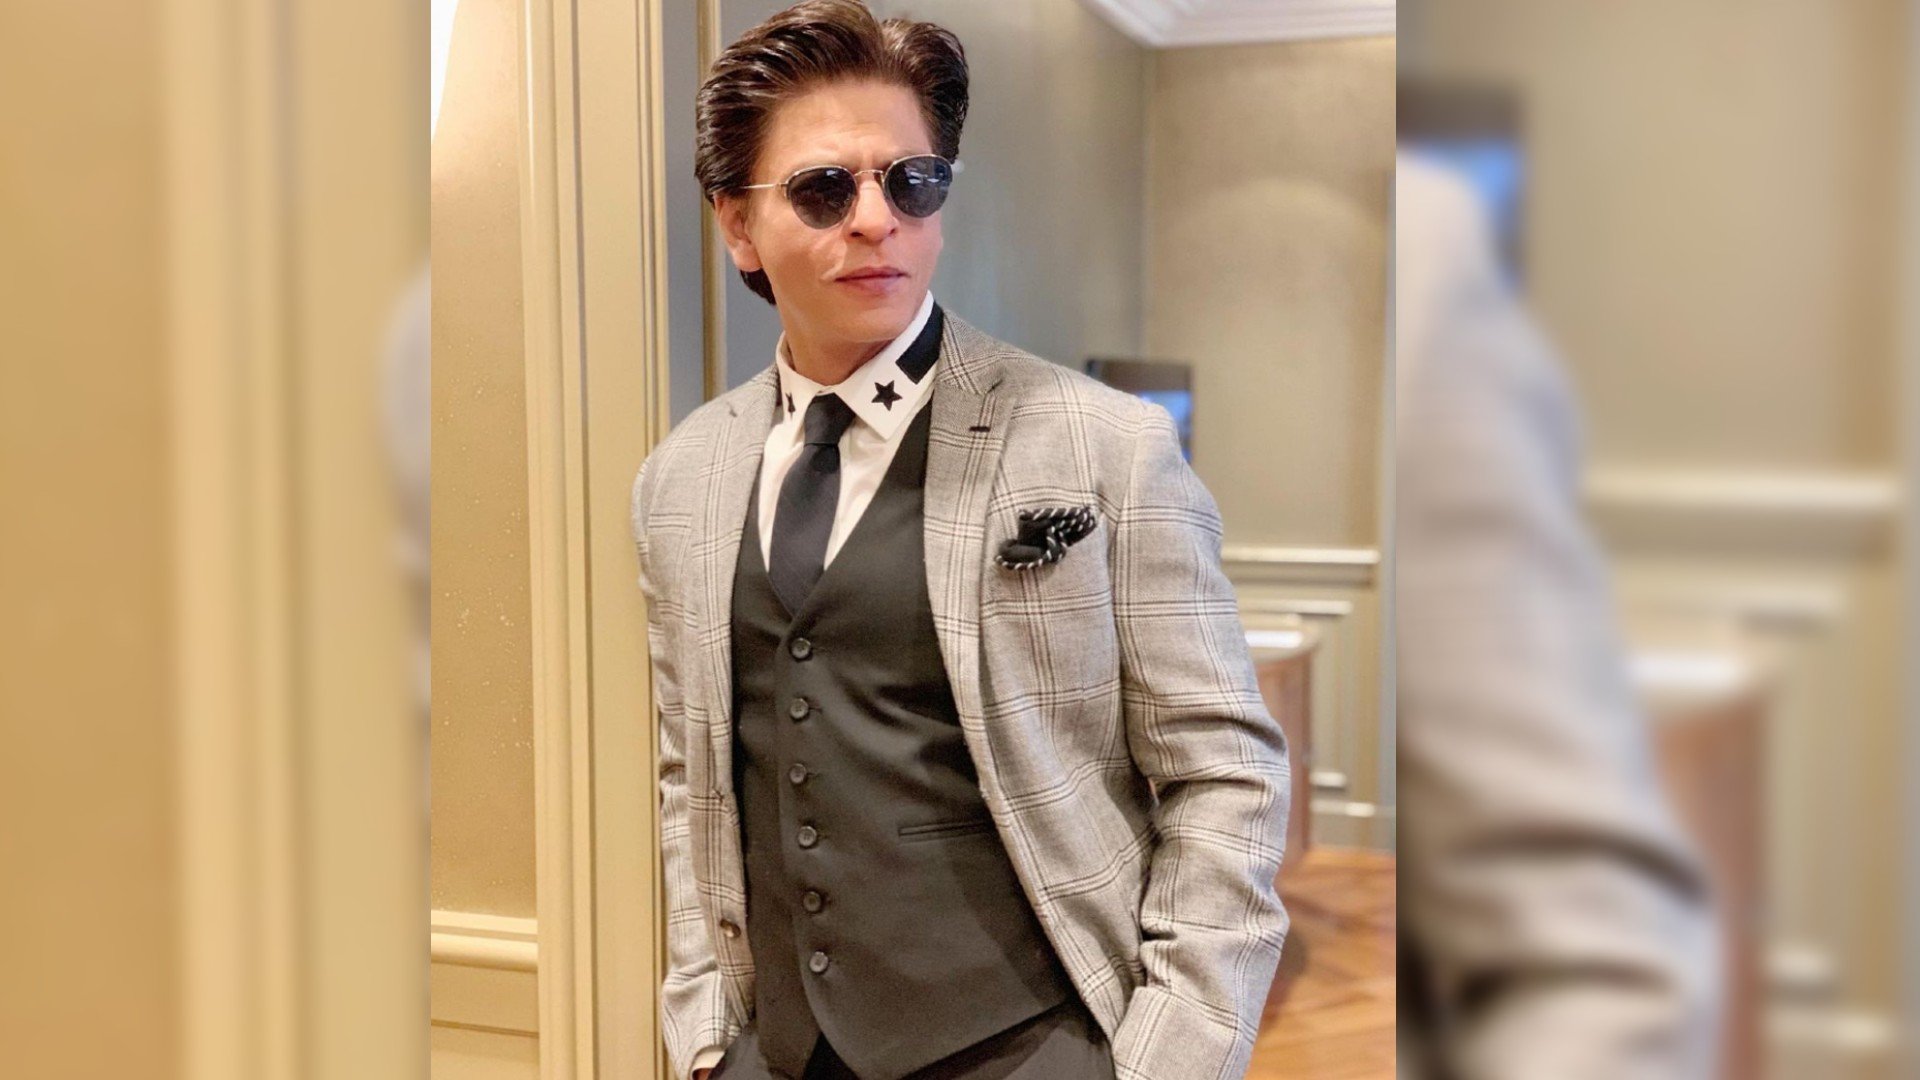 Officials stopped Shah Rukh Khan at the airport due to custom duty